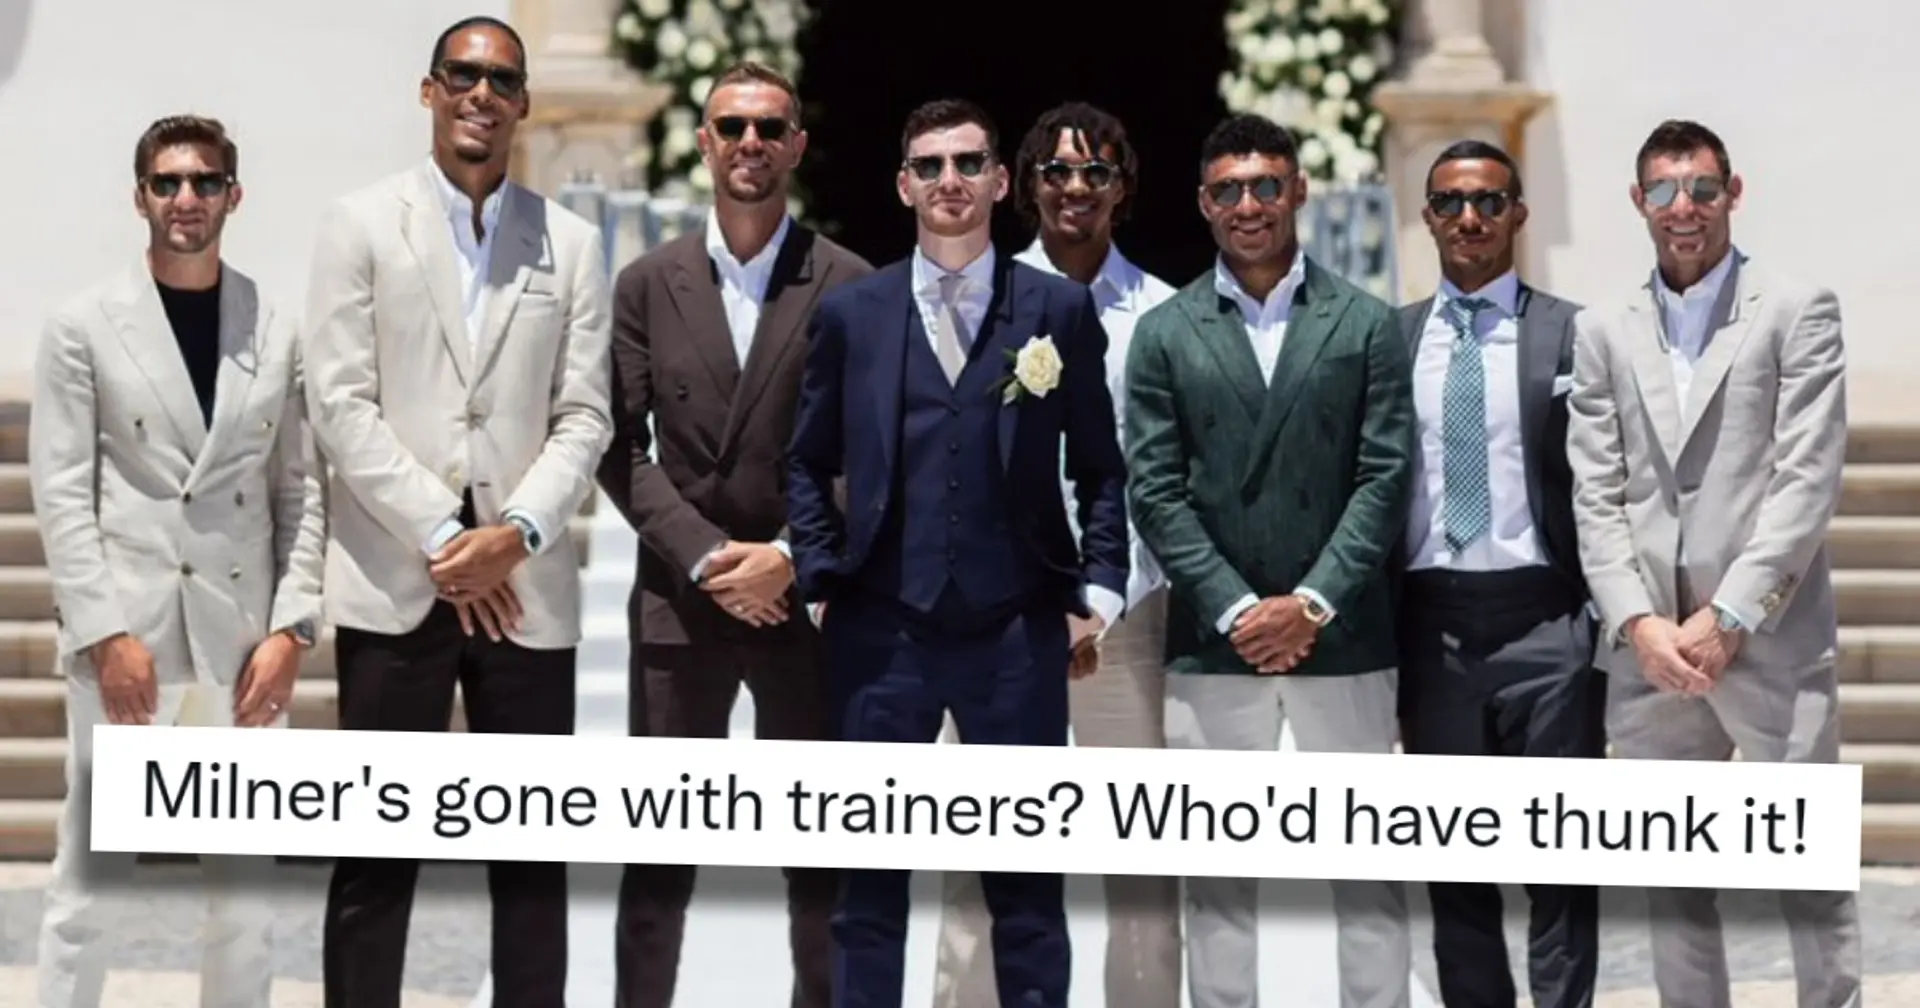 'Boys looking sharp': picture from Andy Robertson's wedding goes viral